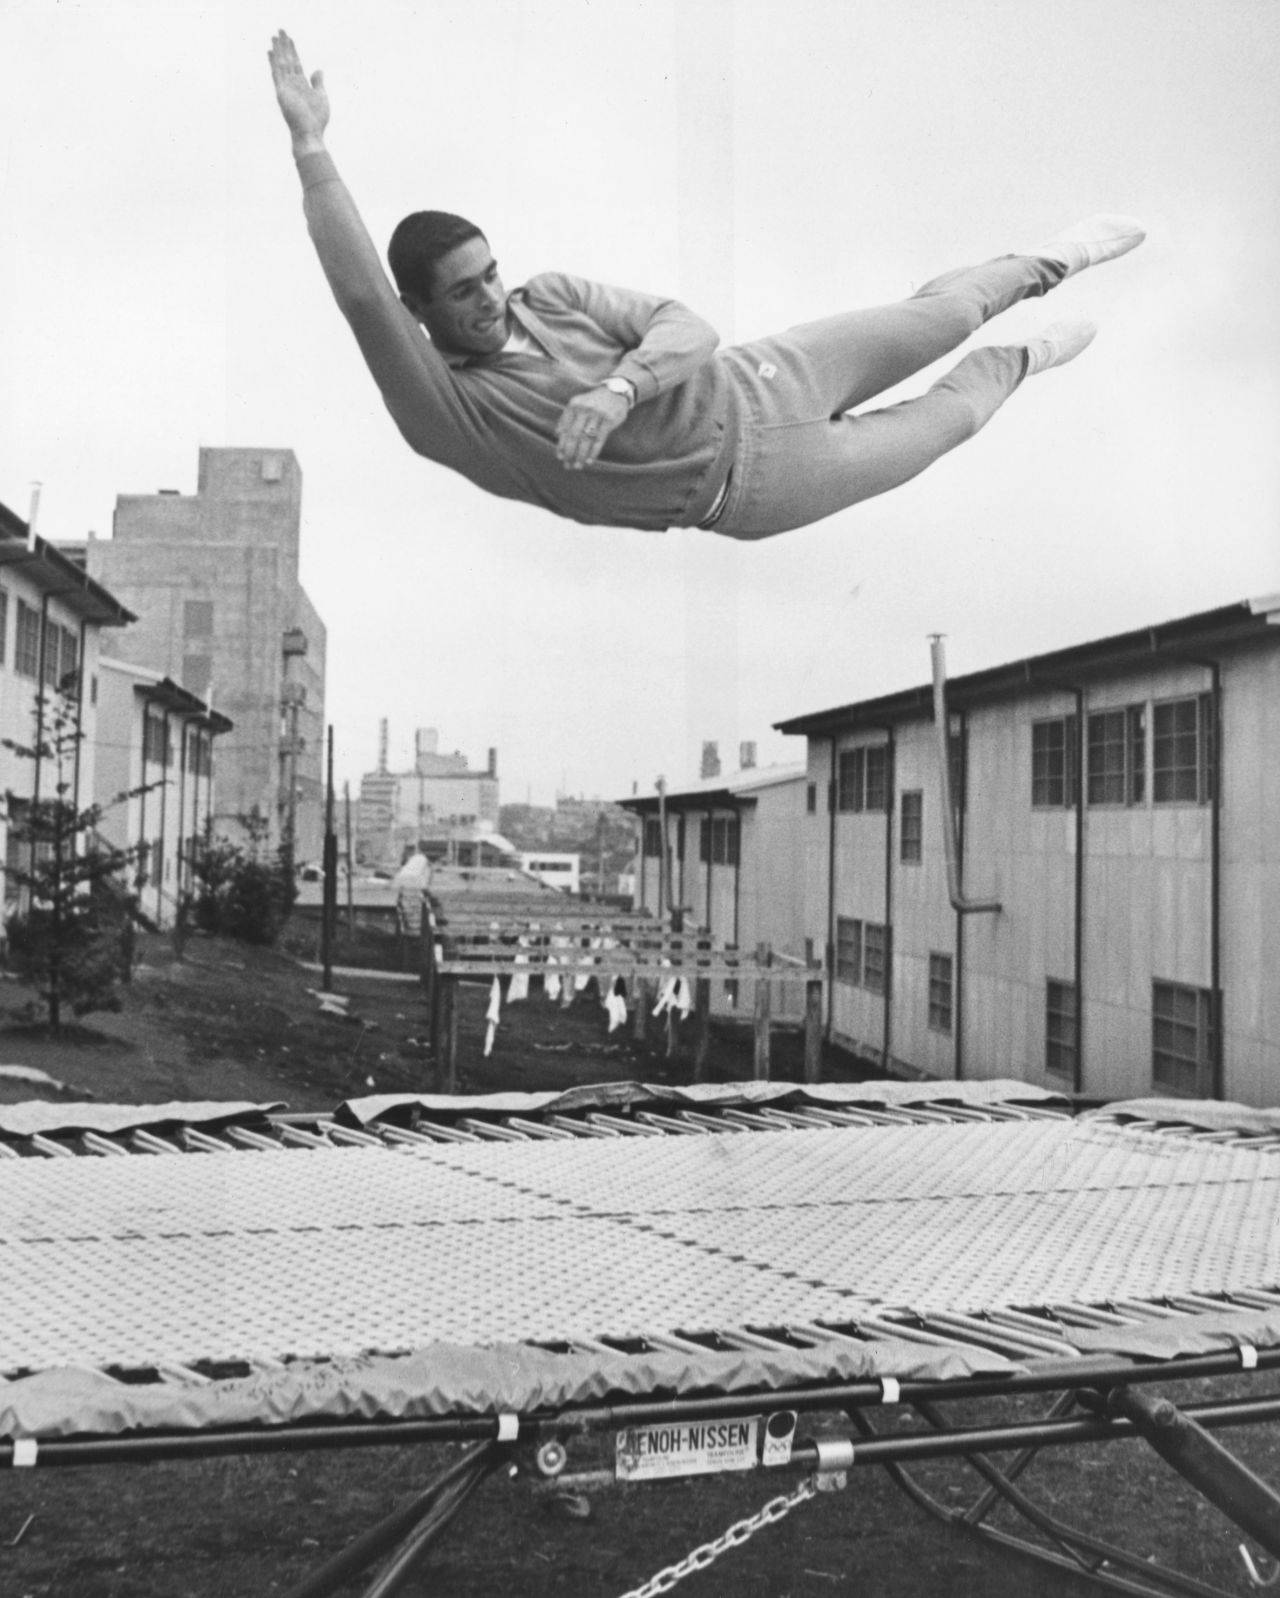 October 1, 1964: American pole vaulter Fred Hansen trains on a trampoline at the Olympic village in Tokyo. 